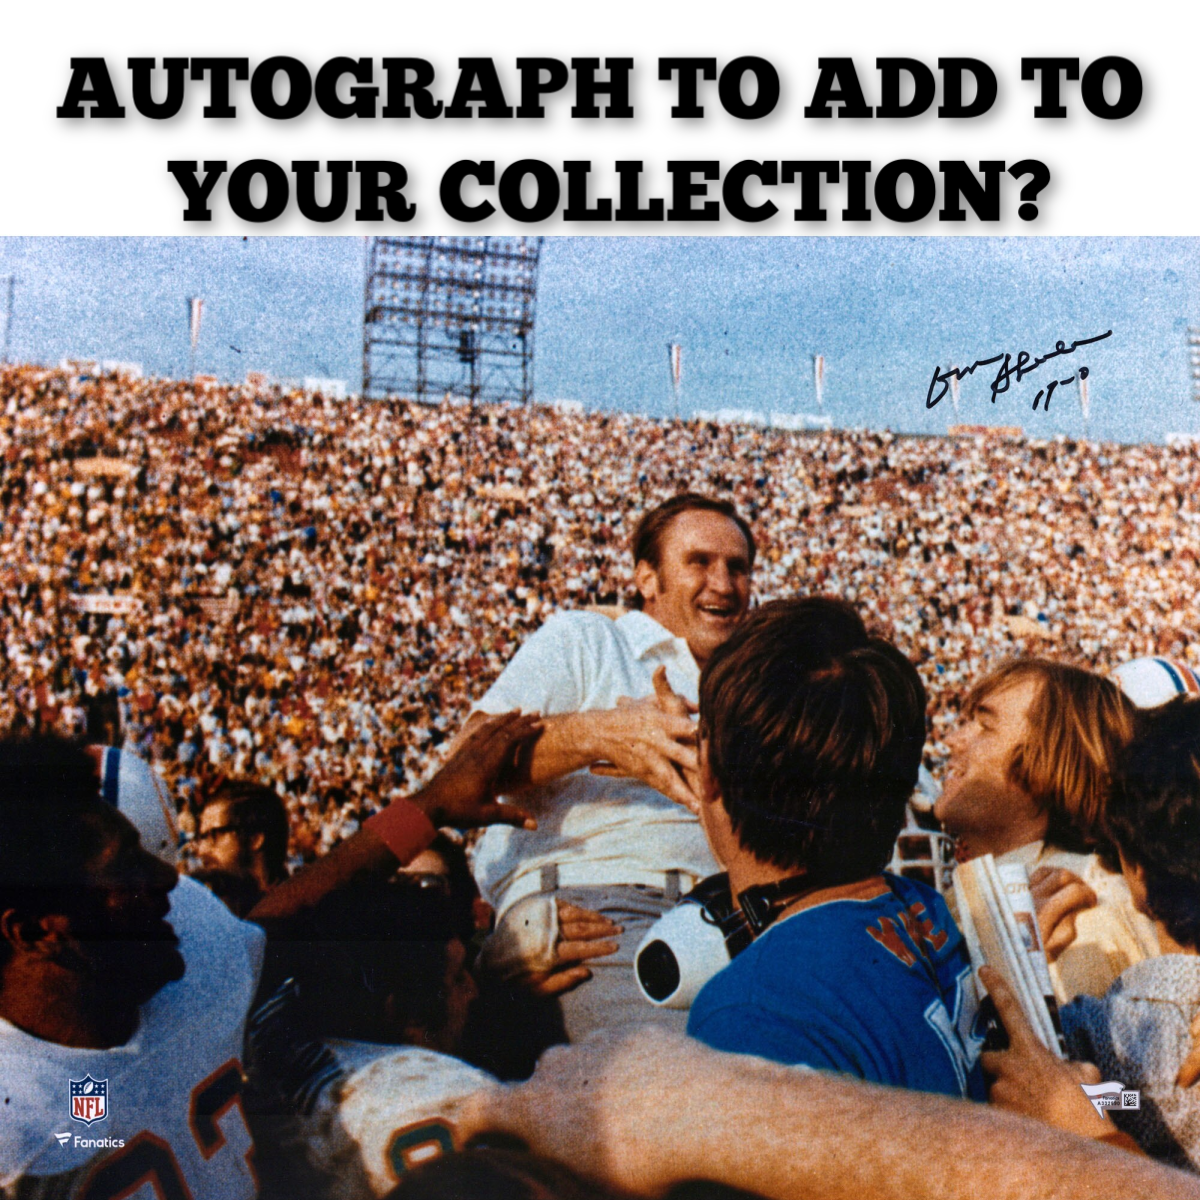 Don Shula Autograph - one to add to your collection?